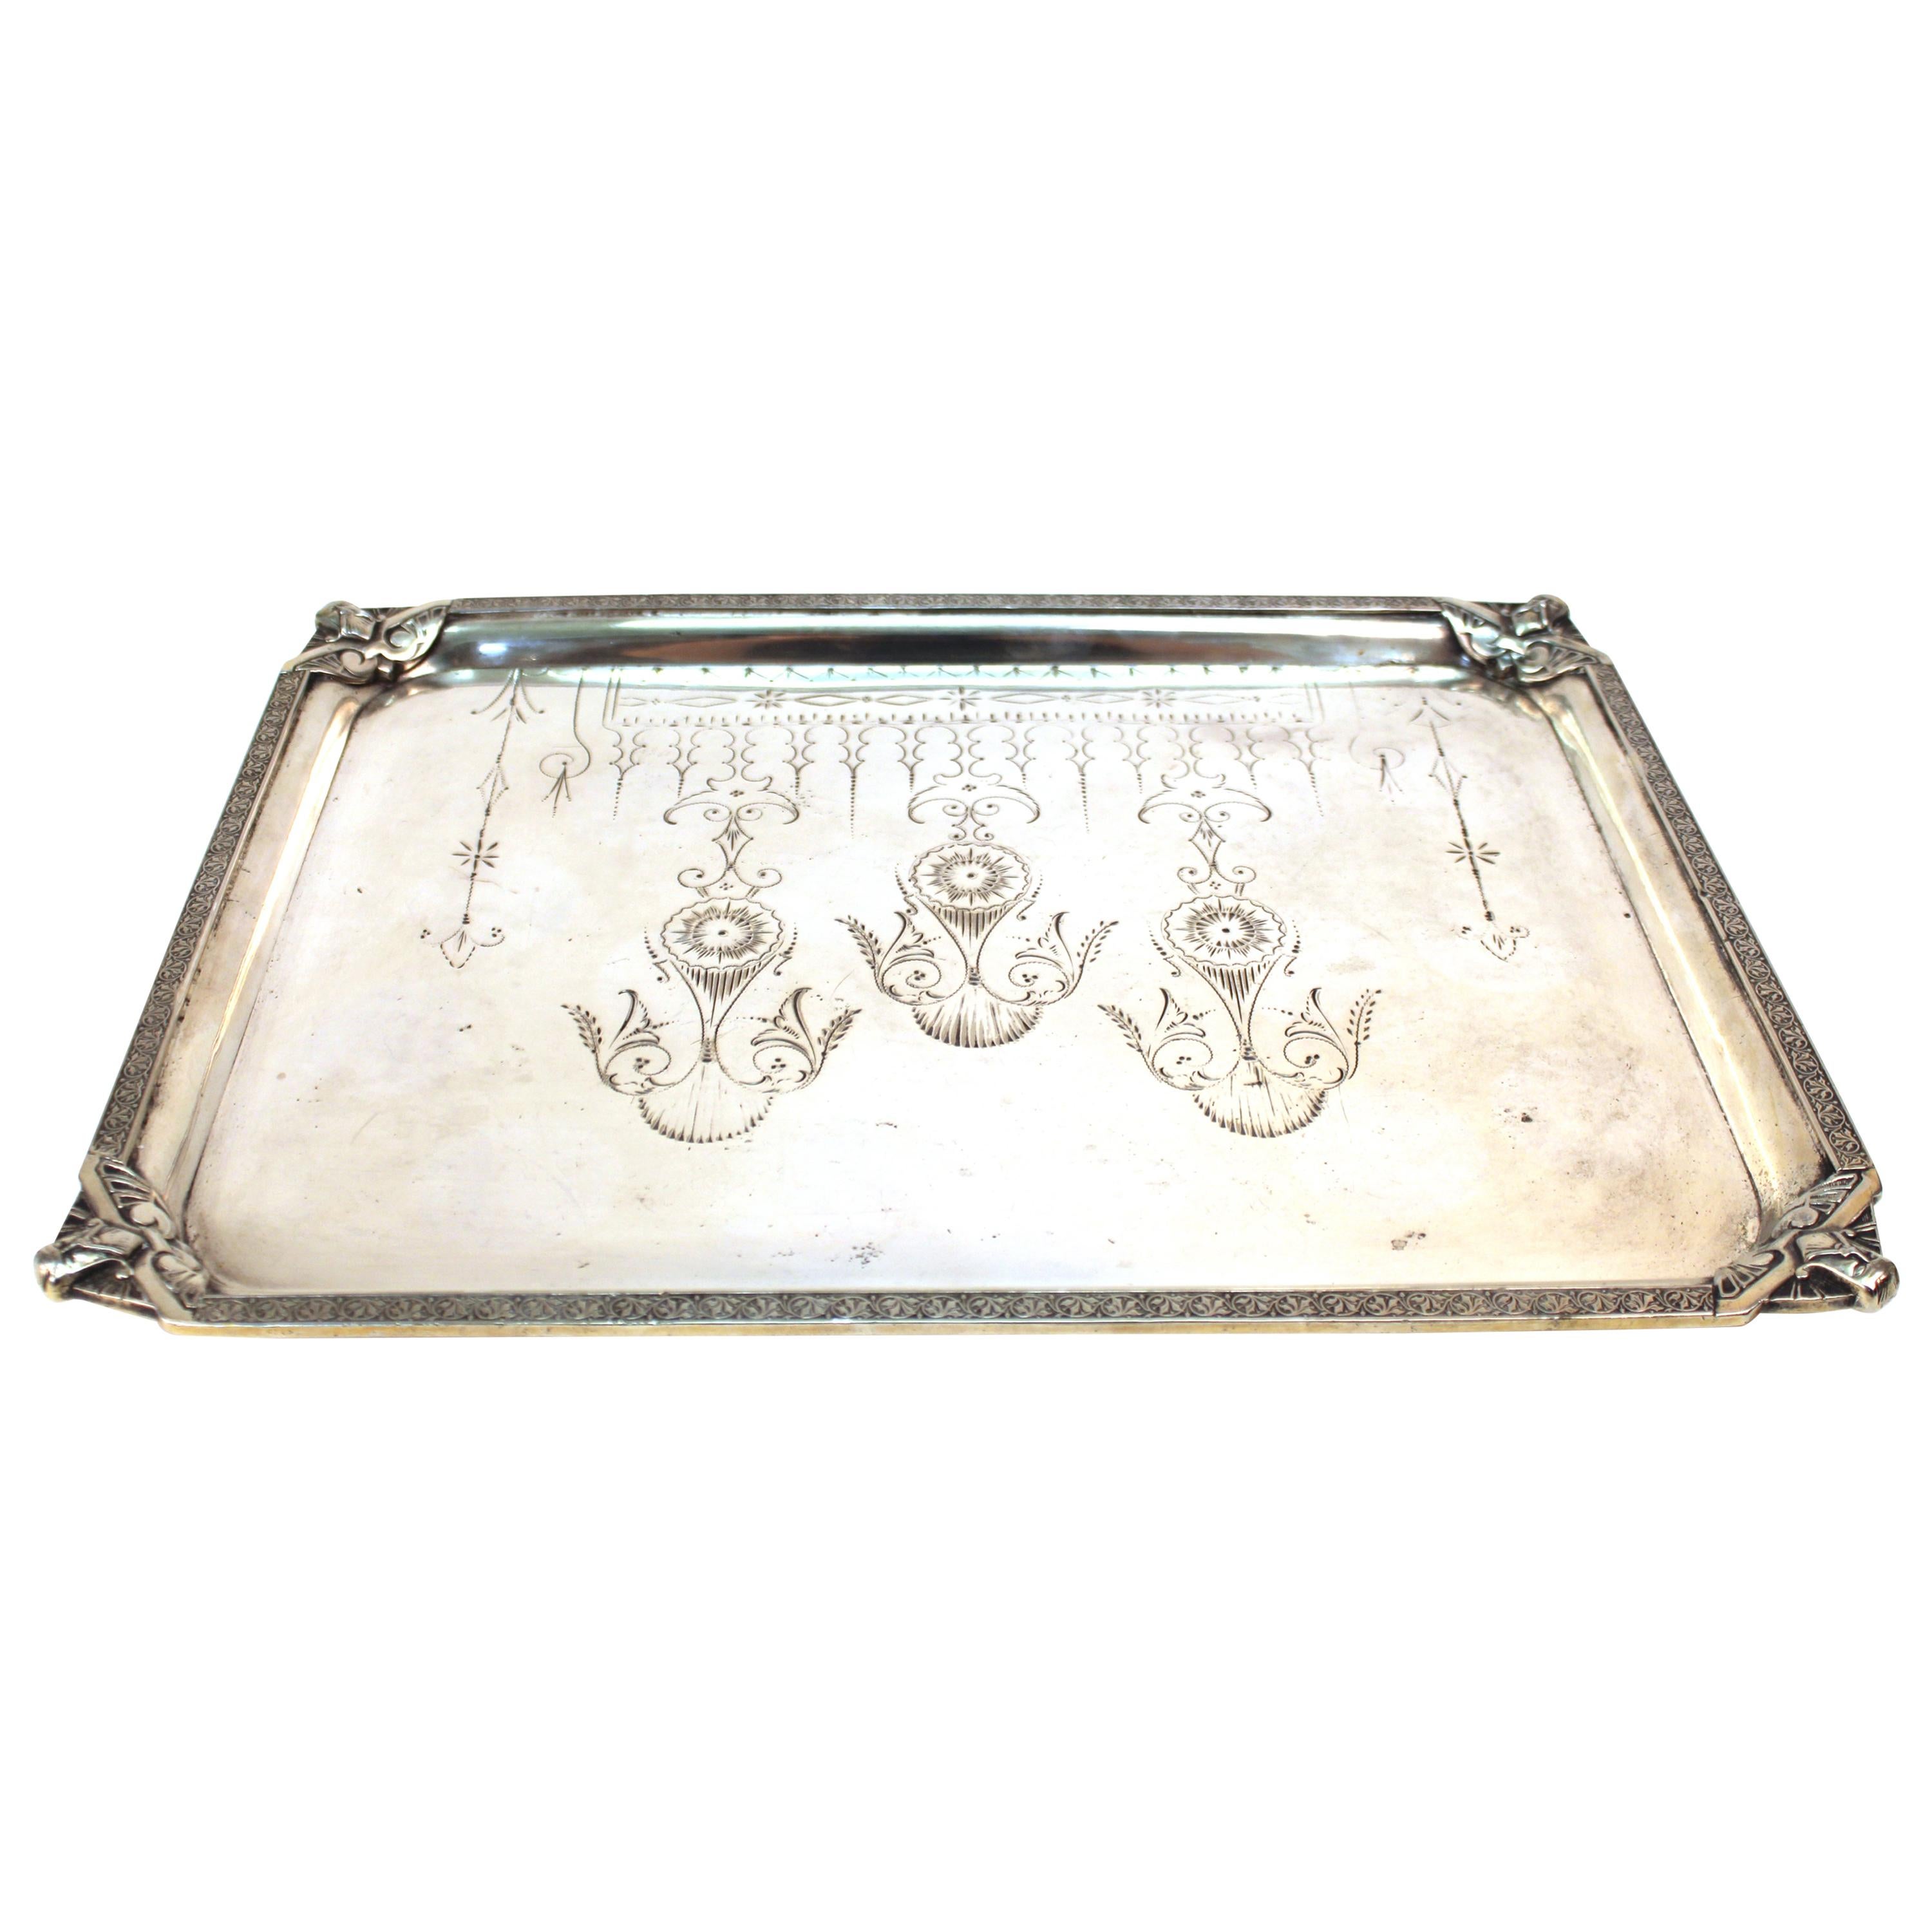 Homan English Victorian Silver Plated Serving Tray with Mascaron Decoration